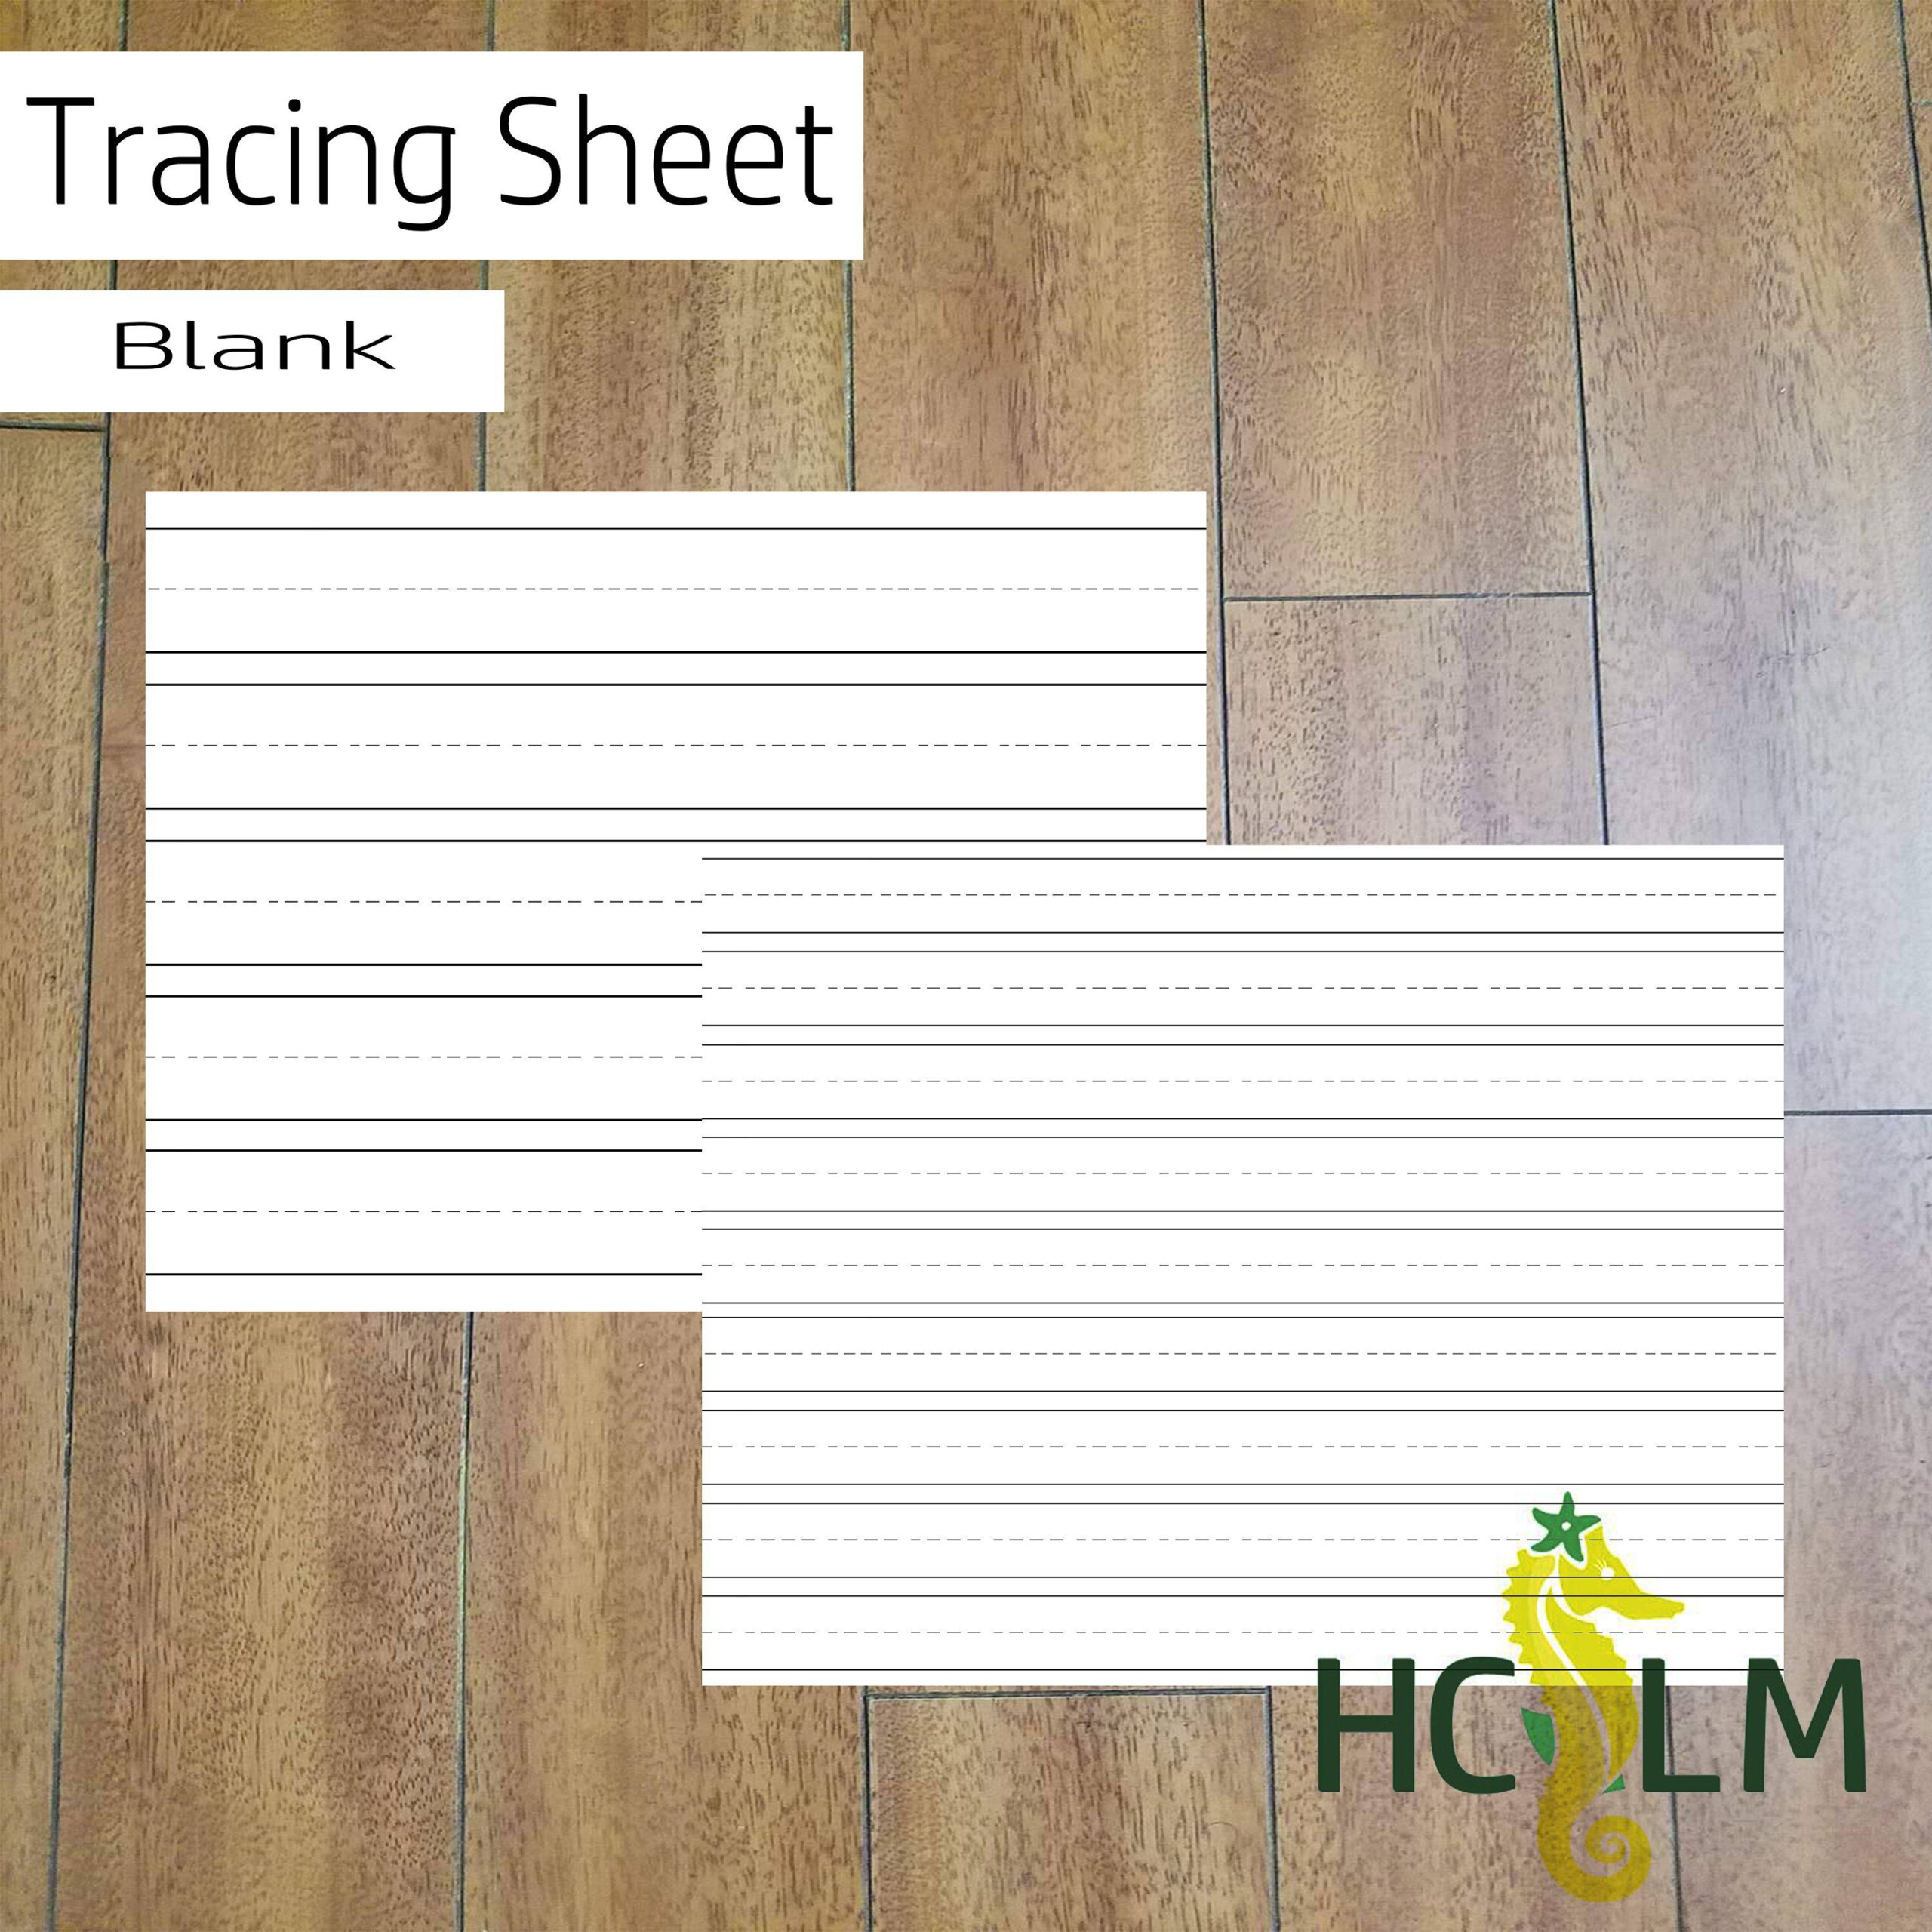 Blank Tracing Sheet, I Can Write My Name, Tracing, Practice